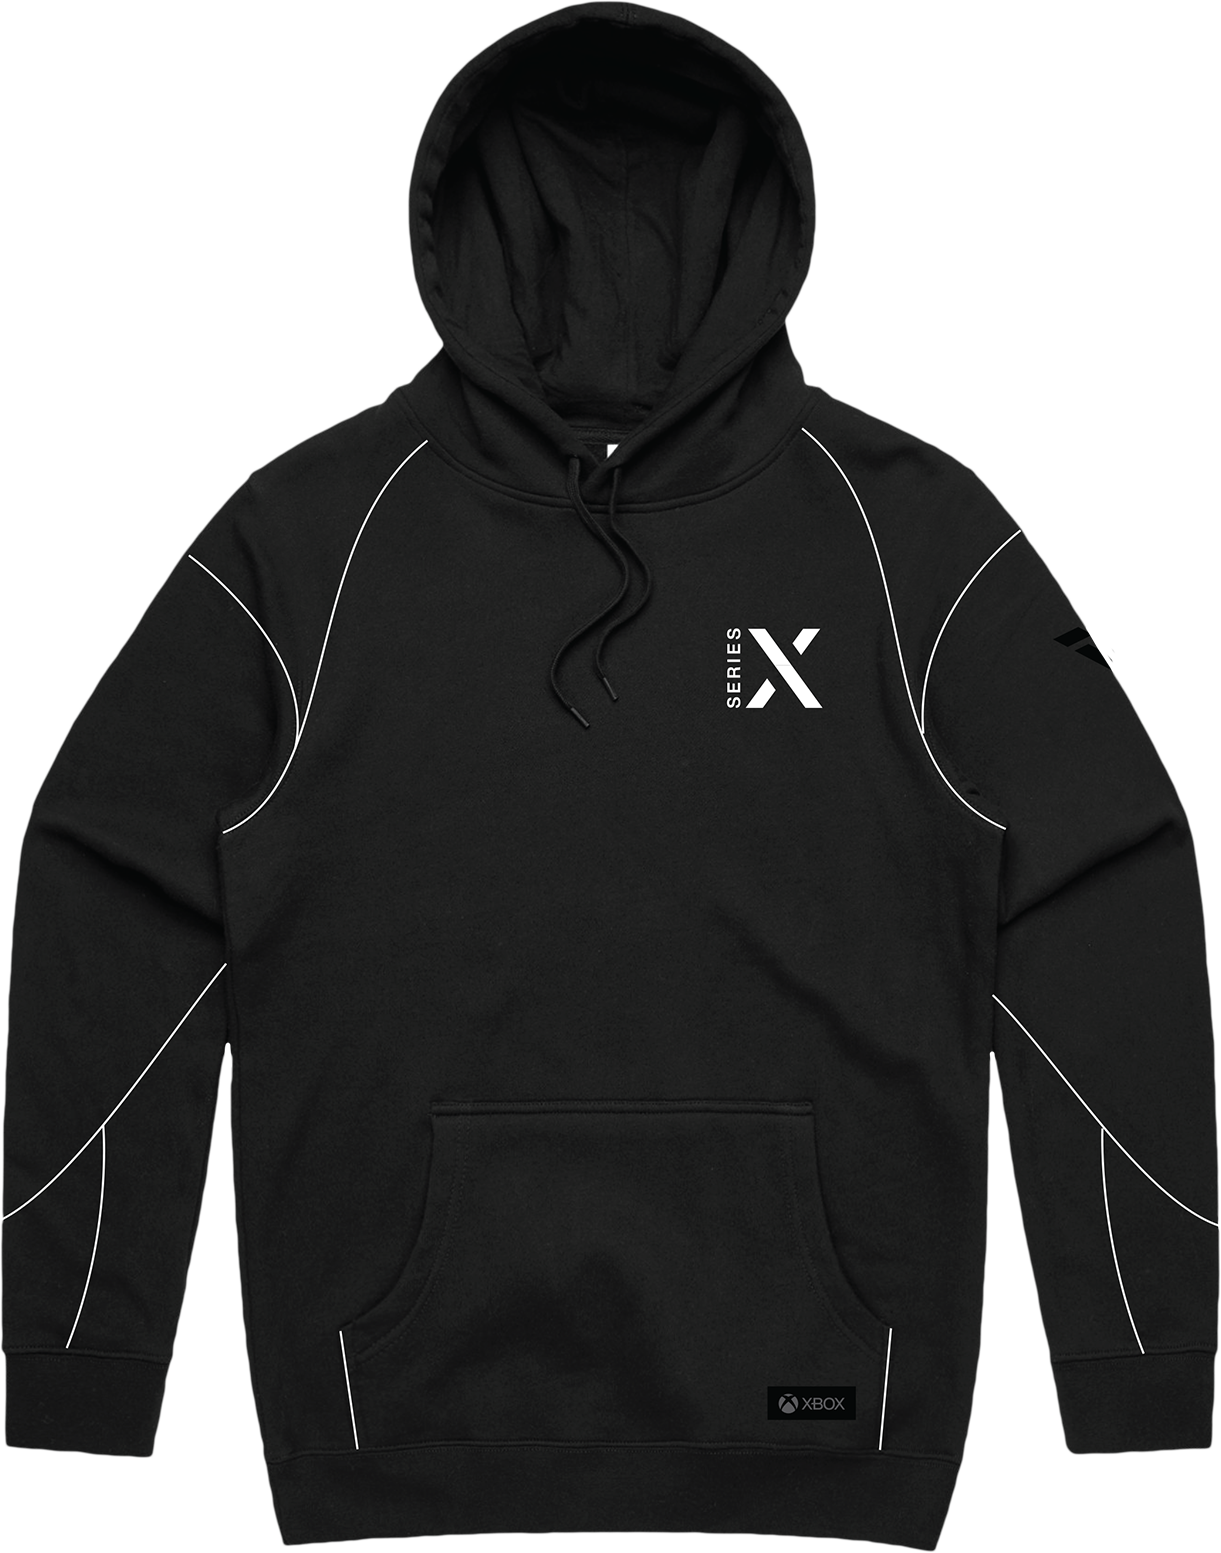 Xbox Series X Pullover Hoodie - M